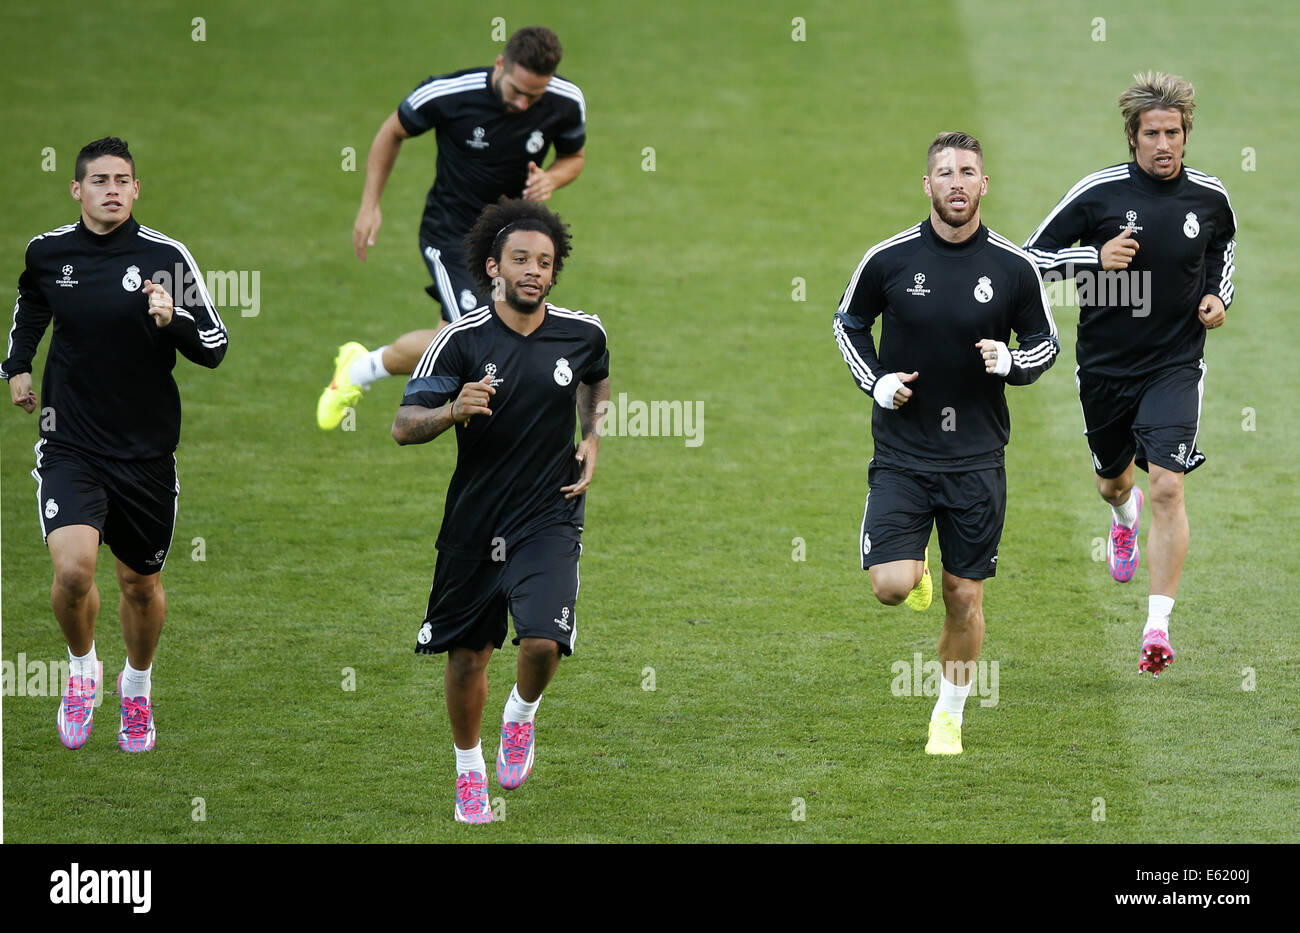 Cardiff, L to R) of Real Madrid take a training session for the UEFA Super Cup match between Real Madrid and Sevilla at Cardiff City Stadium in Cardiff. 11th Aug, 2014. James Rodriguez, Marcelo, Ramos and Fabio Coentrao (front, from L to R) of Real Madrid take a training session for the UEFA Super Cup match between Real Madrid and Sevilla at Cardiff City Stadium in Cardiff, Britain on Aug. 11, 2014. © Wang Lili/Xinhua/Alamy Live News Stock Photo